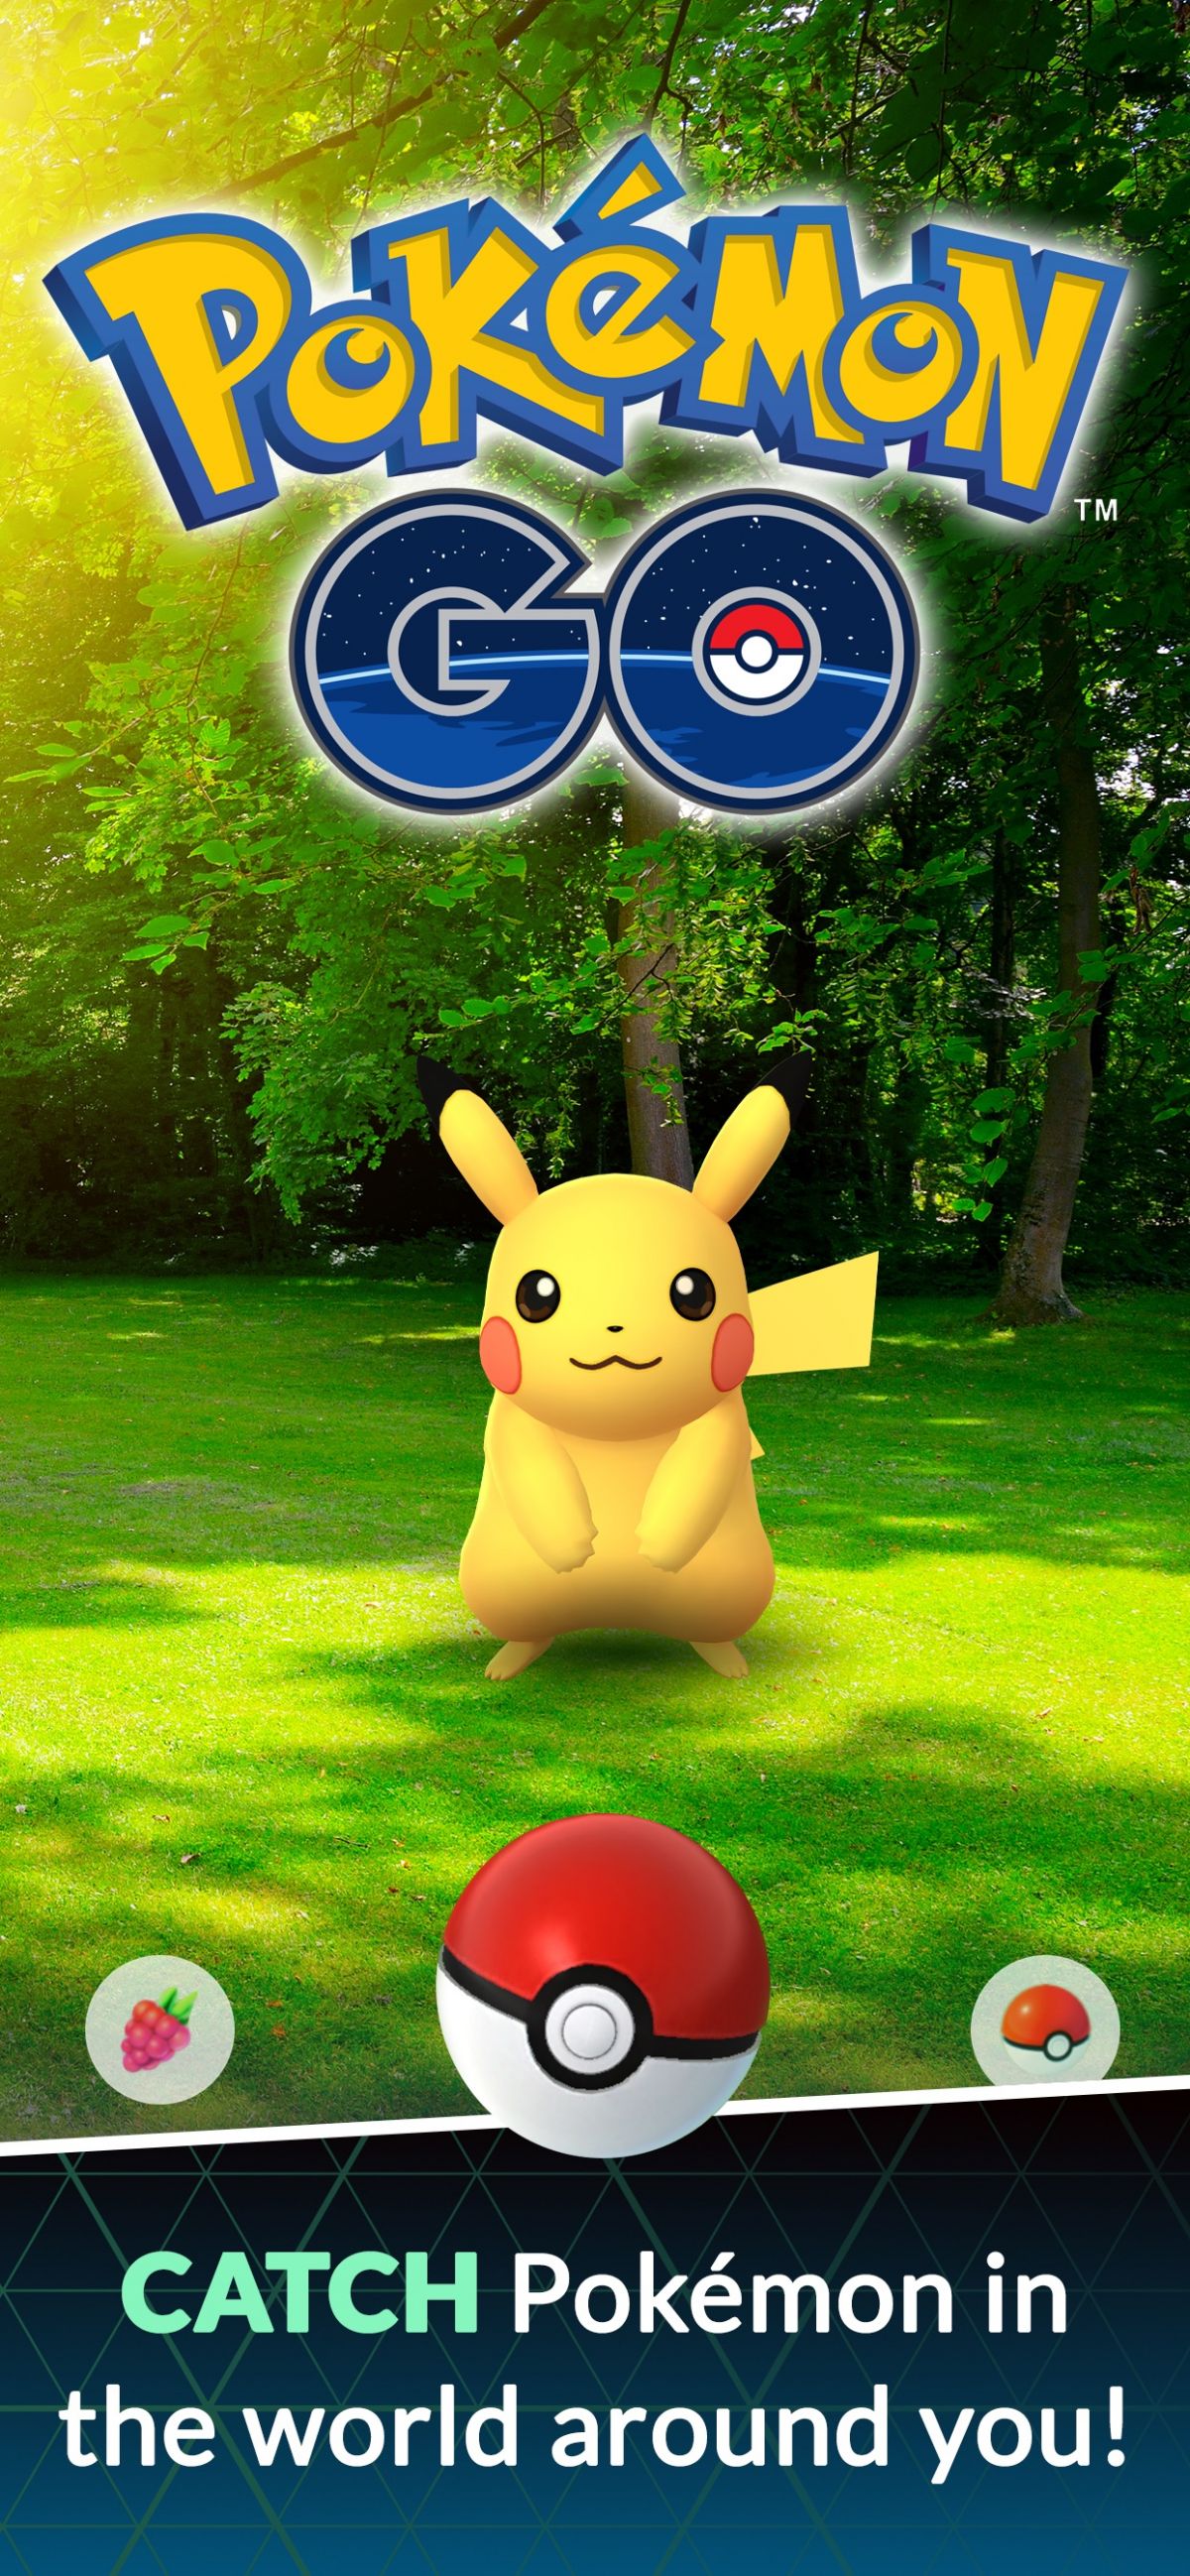 Pokemon GO We update our daily, the latest and most